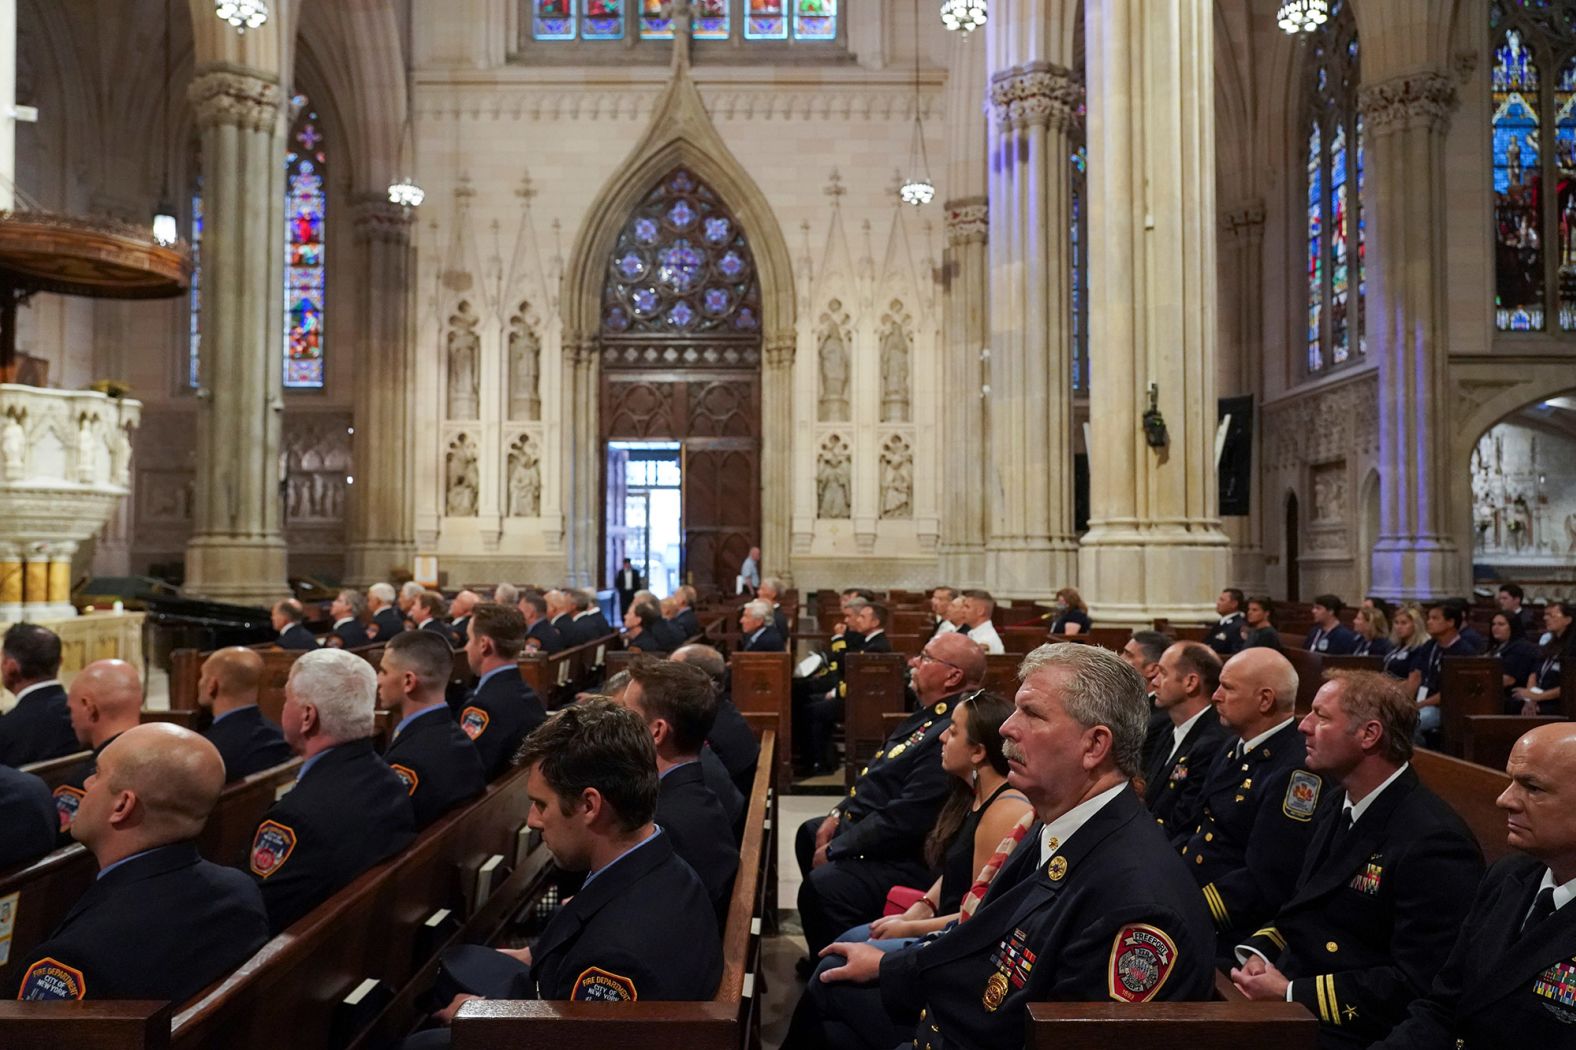 Firefighters and their family members attend a memorial service for fallen firefighters at St. Patrick's Cathedral in New York.